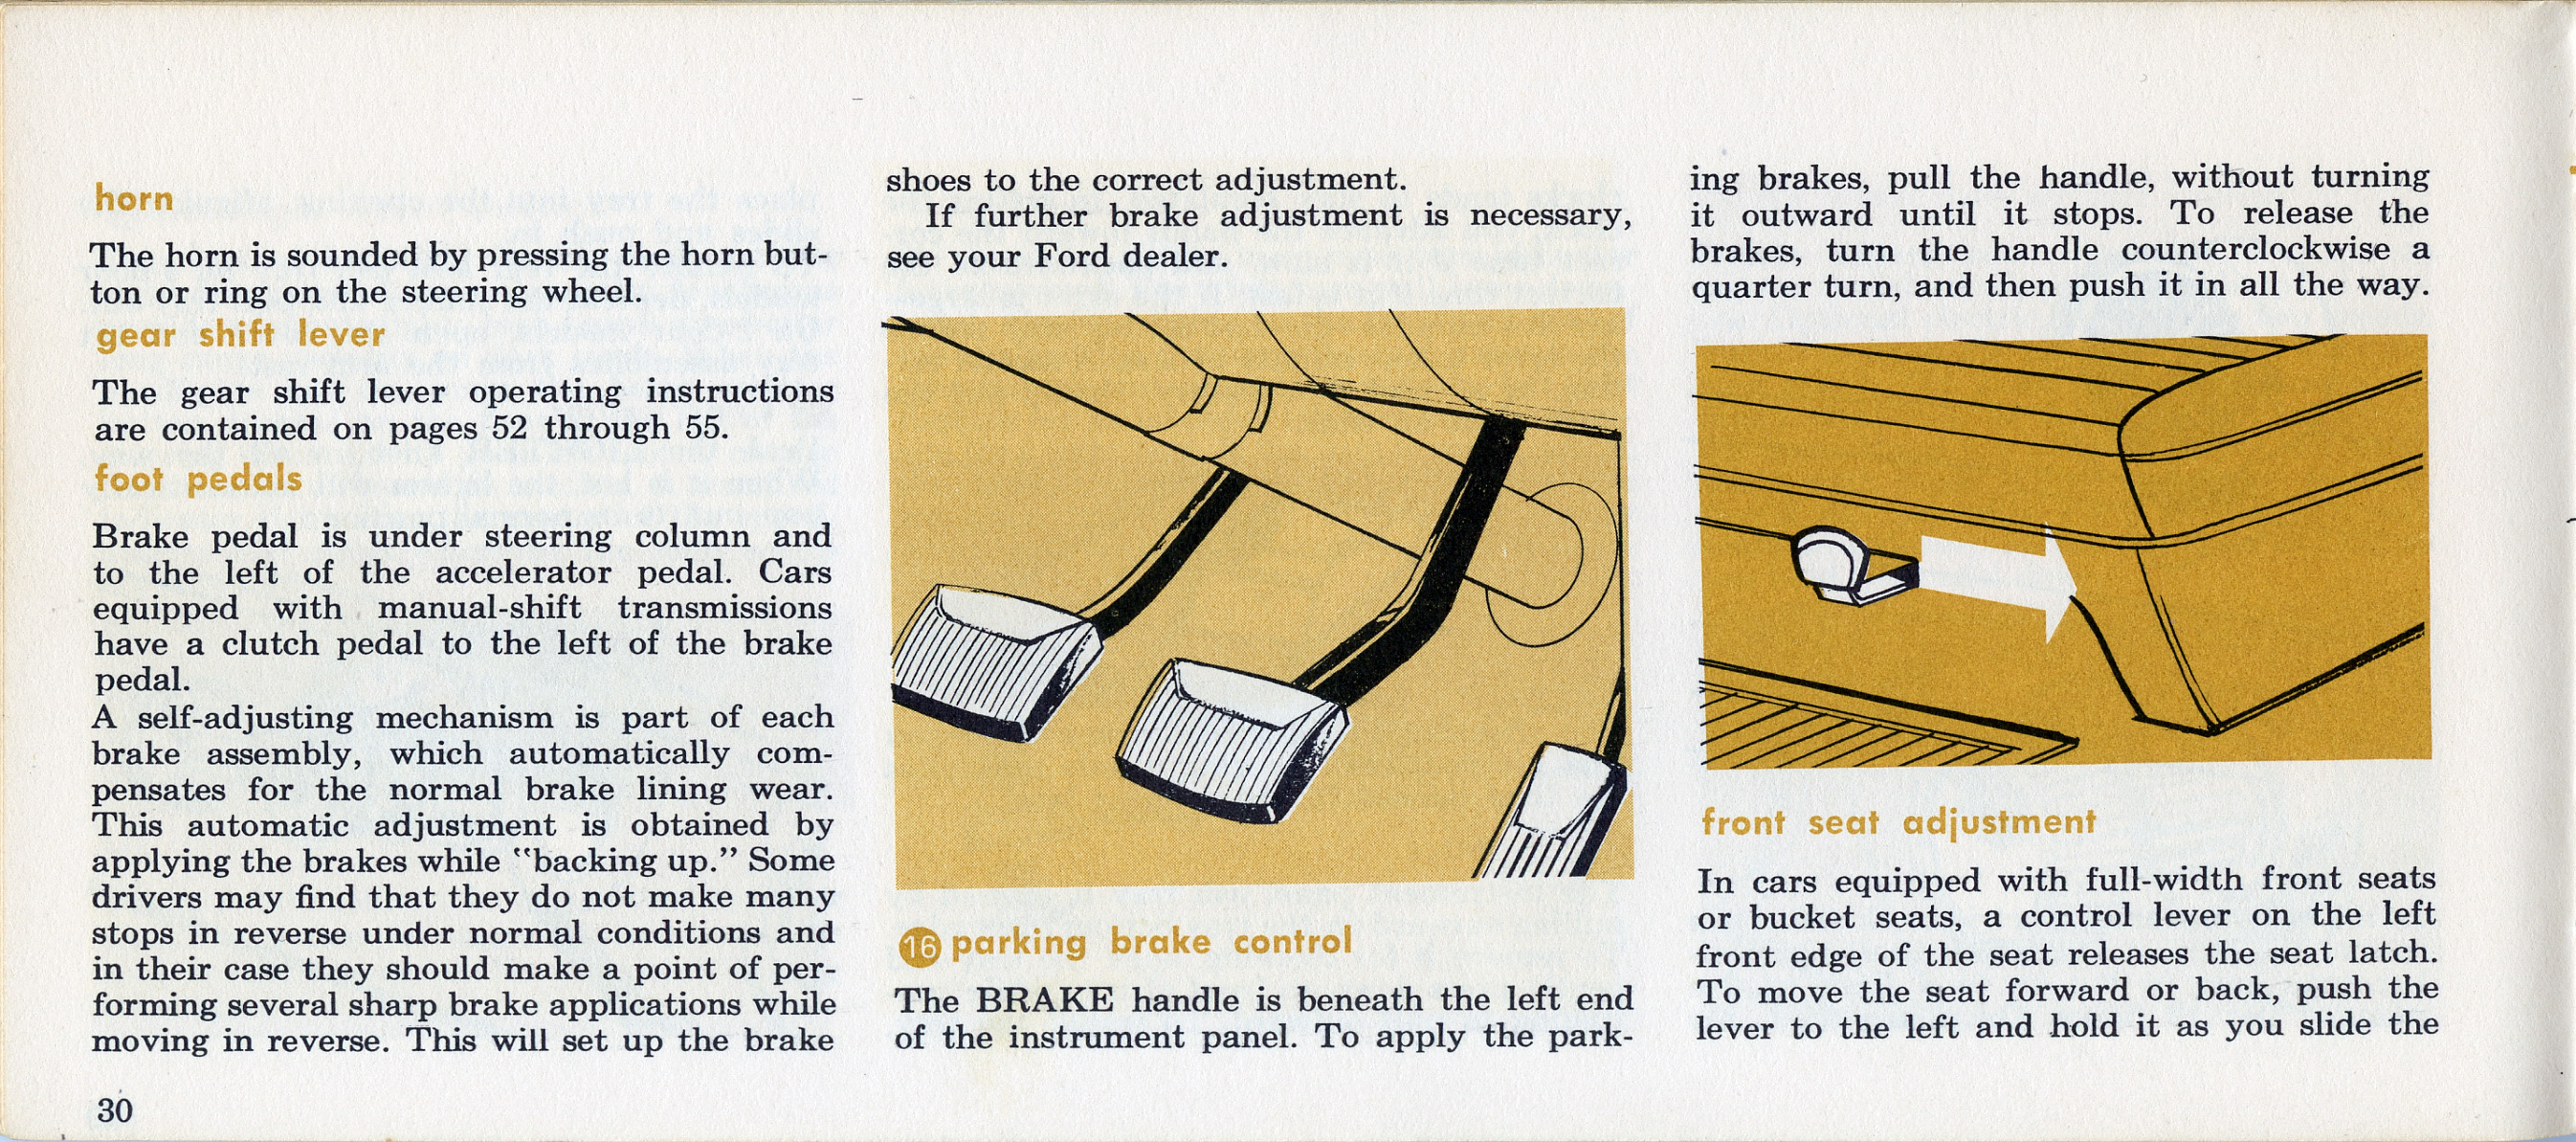 1964 Ford Falcon Owners Manual-30